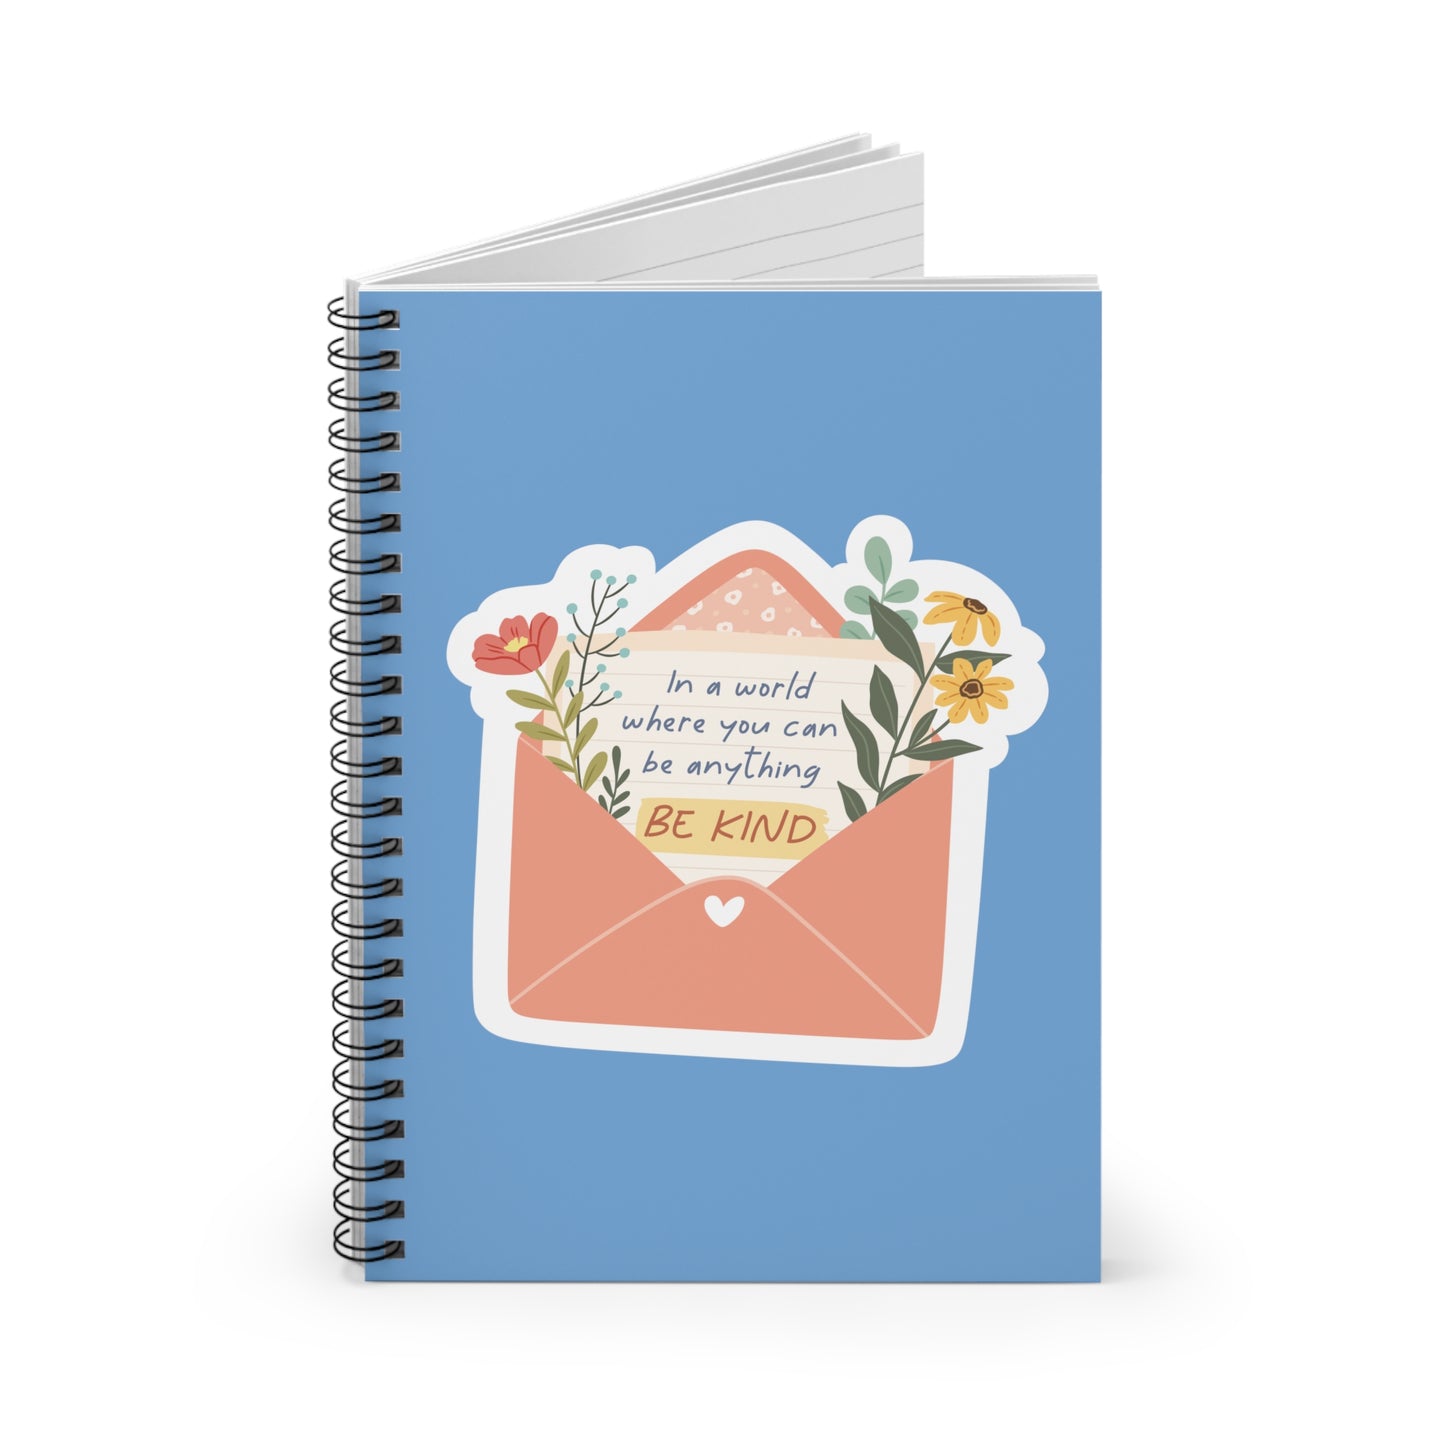 Inspirational "Be Kind" Spiral Notebook - 118 Ruled Pages, Durable Printed Cover